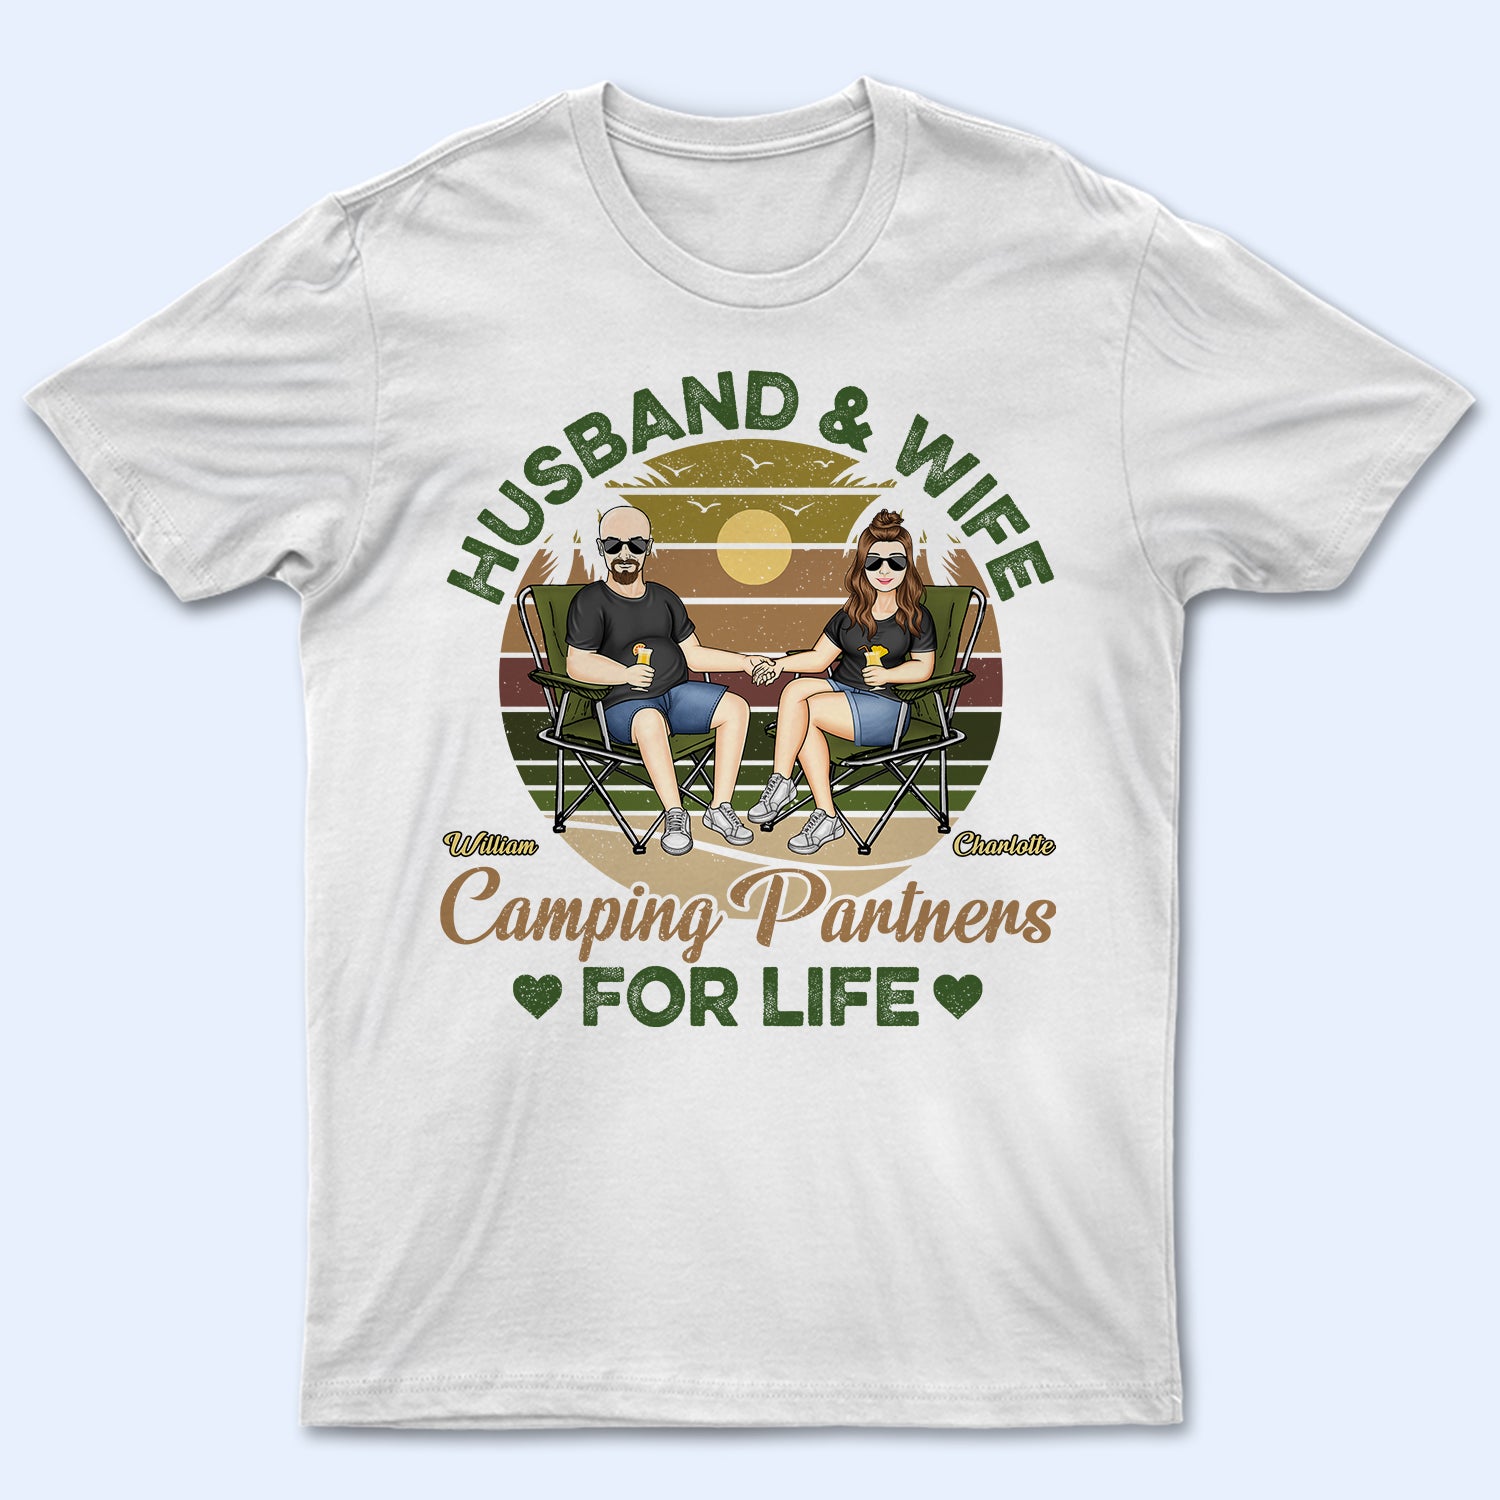 Husband And Wife Camping Partners For Life - Anniversary, Birthday Gift For Spouse, Lover, Husband, Wife, Boyfriend, Girlfriend, Couple - Personalized Custom T Shirt